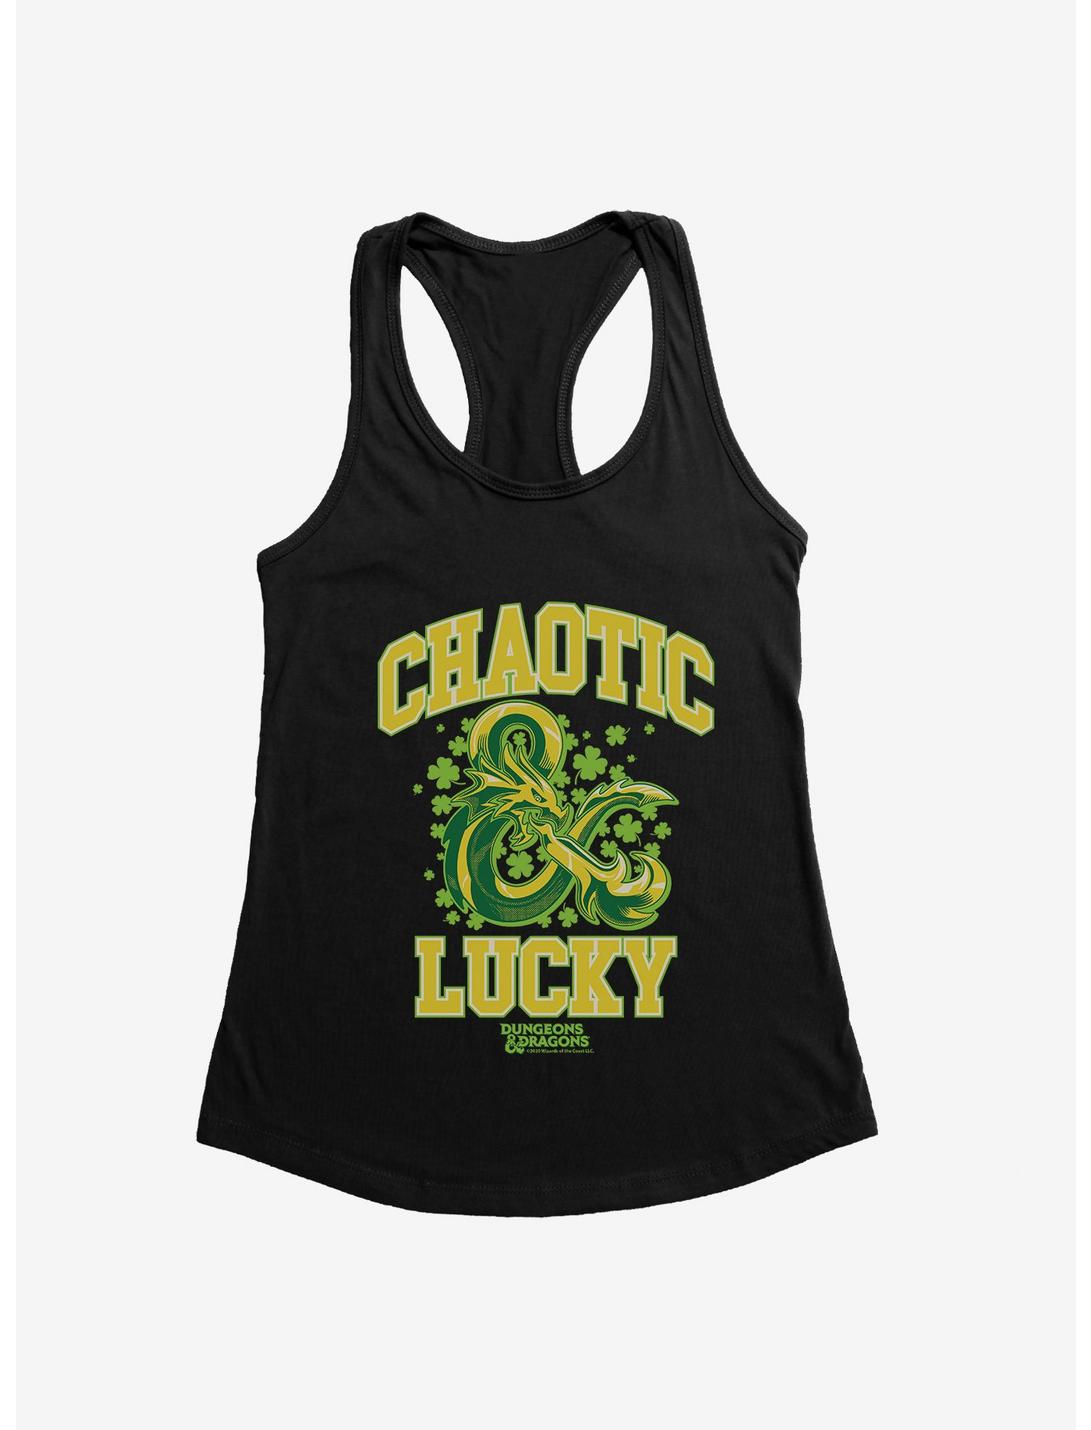 Dungeons & Dragons Chaotic And Lucky Womens Tank Top, BLACK, hi-res